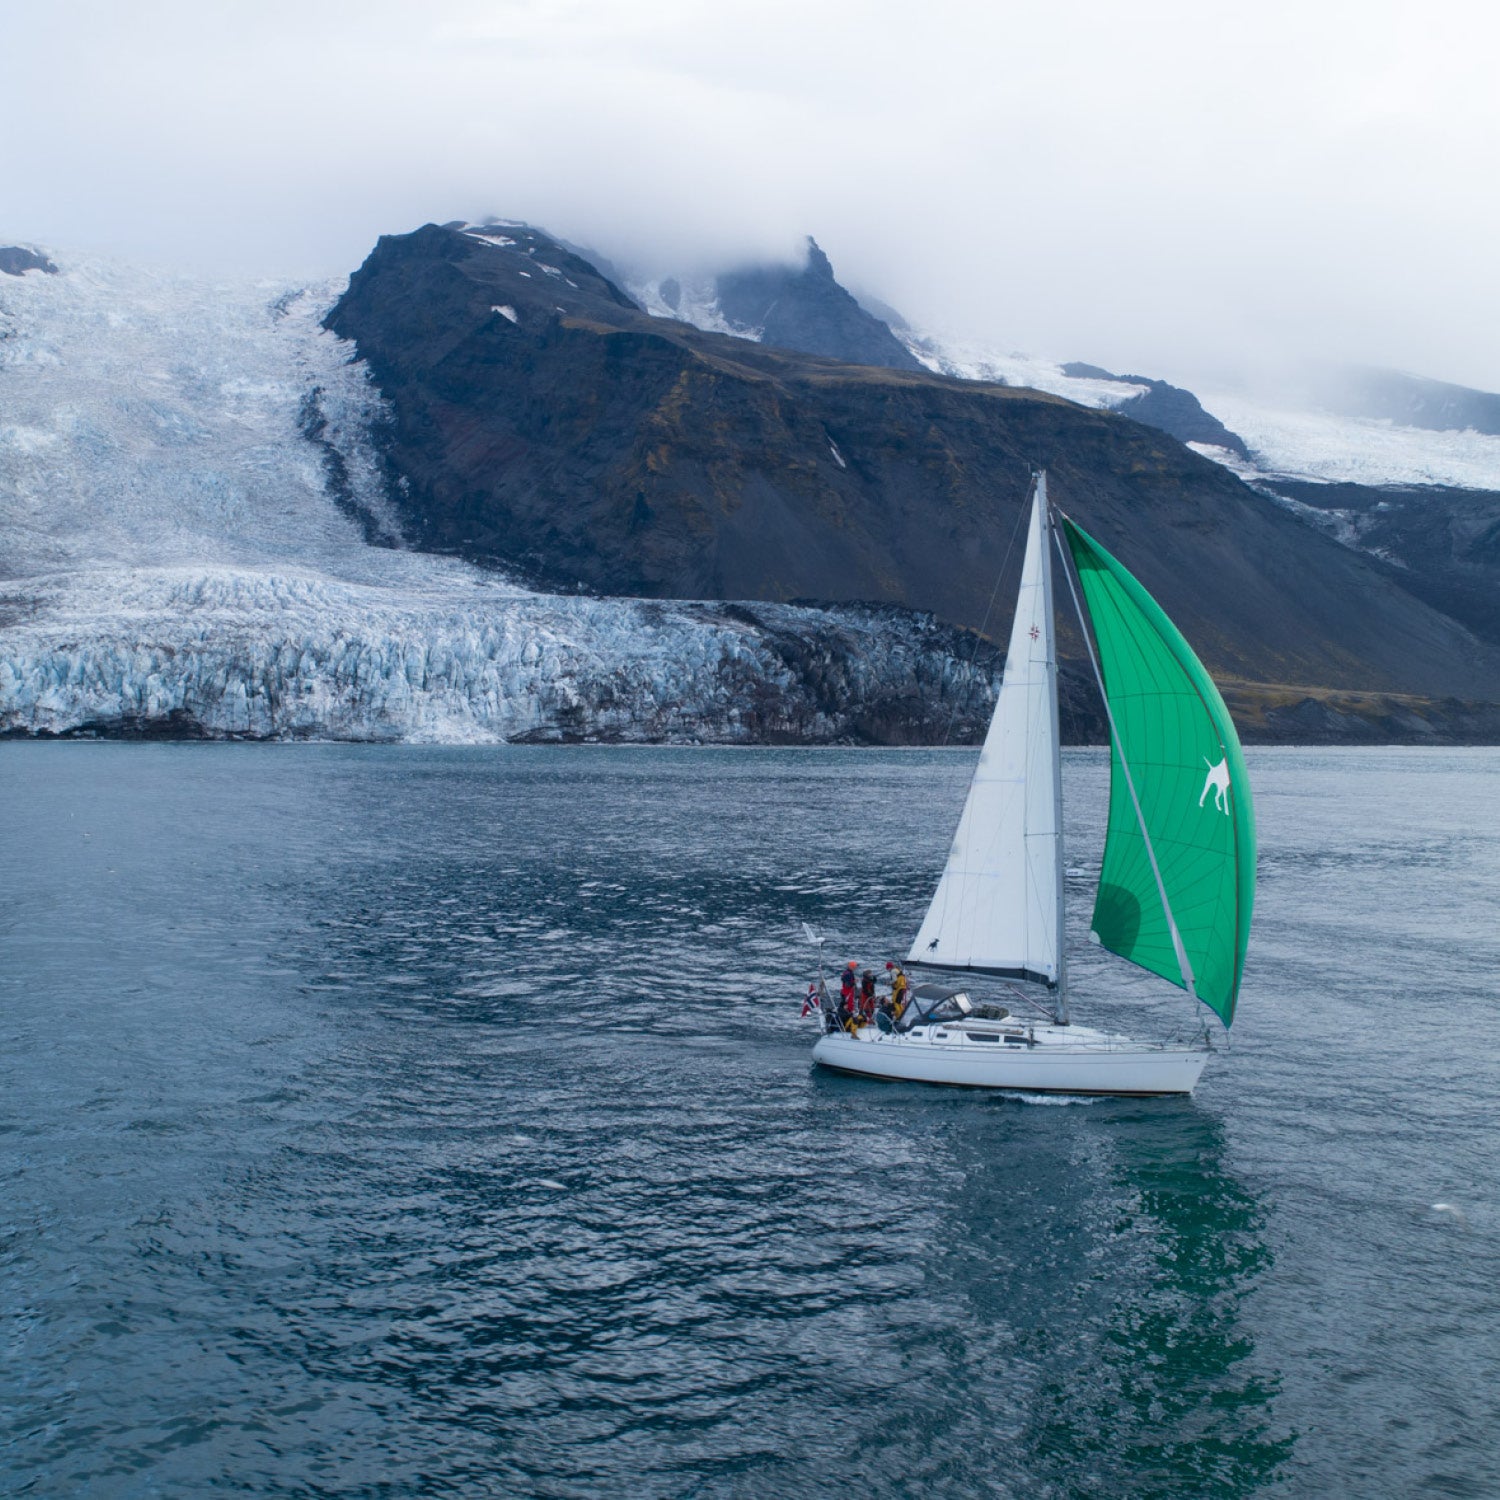 Sea Bags becomes North Sails sustainability partner